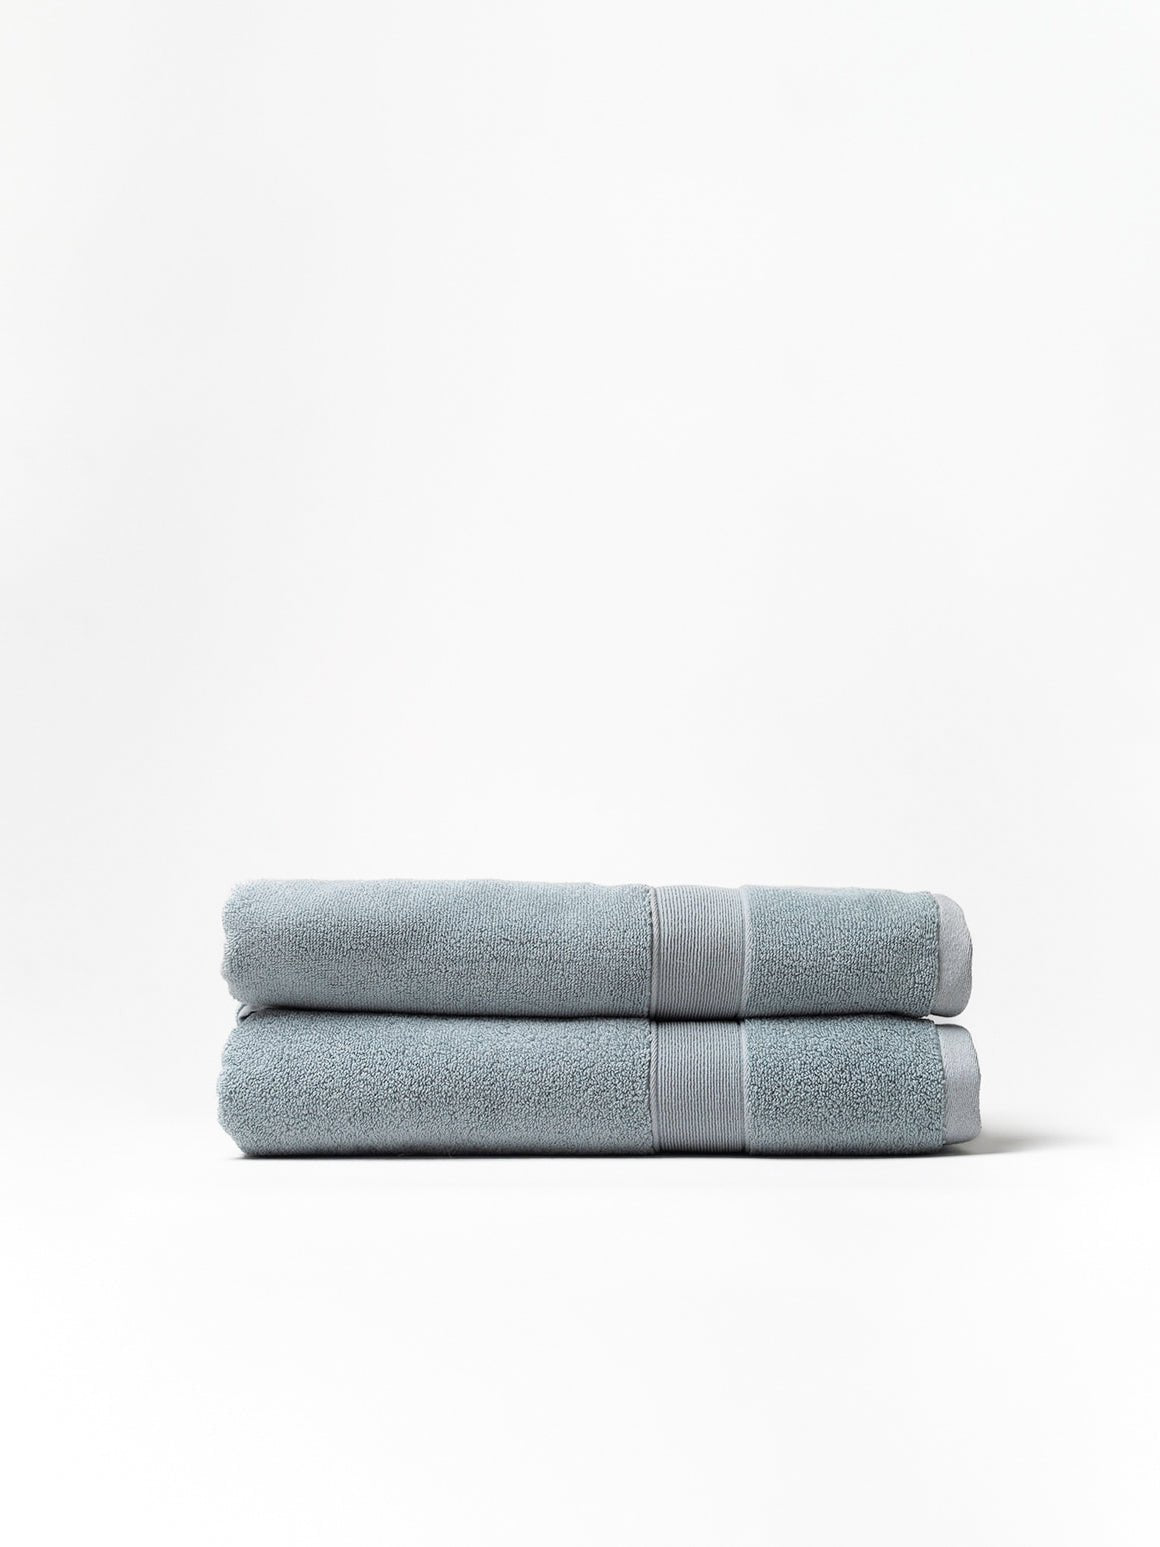 Two luxe bath sheets folded with white background |Color:Harbor Mist